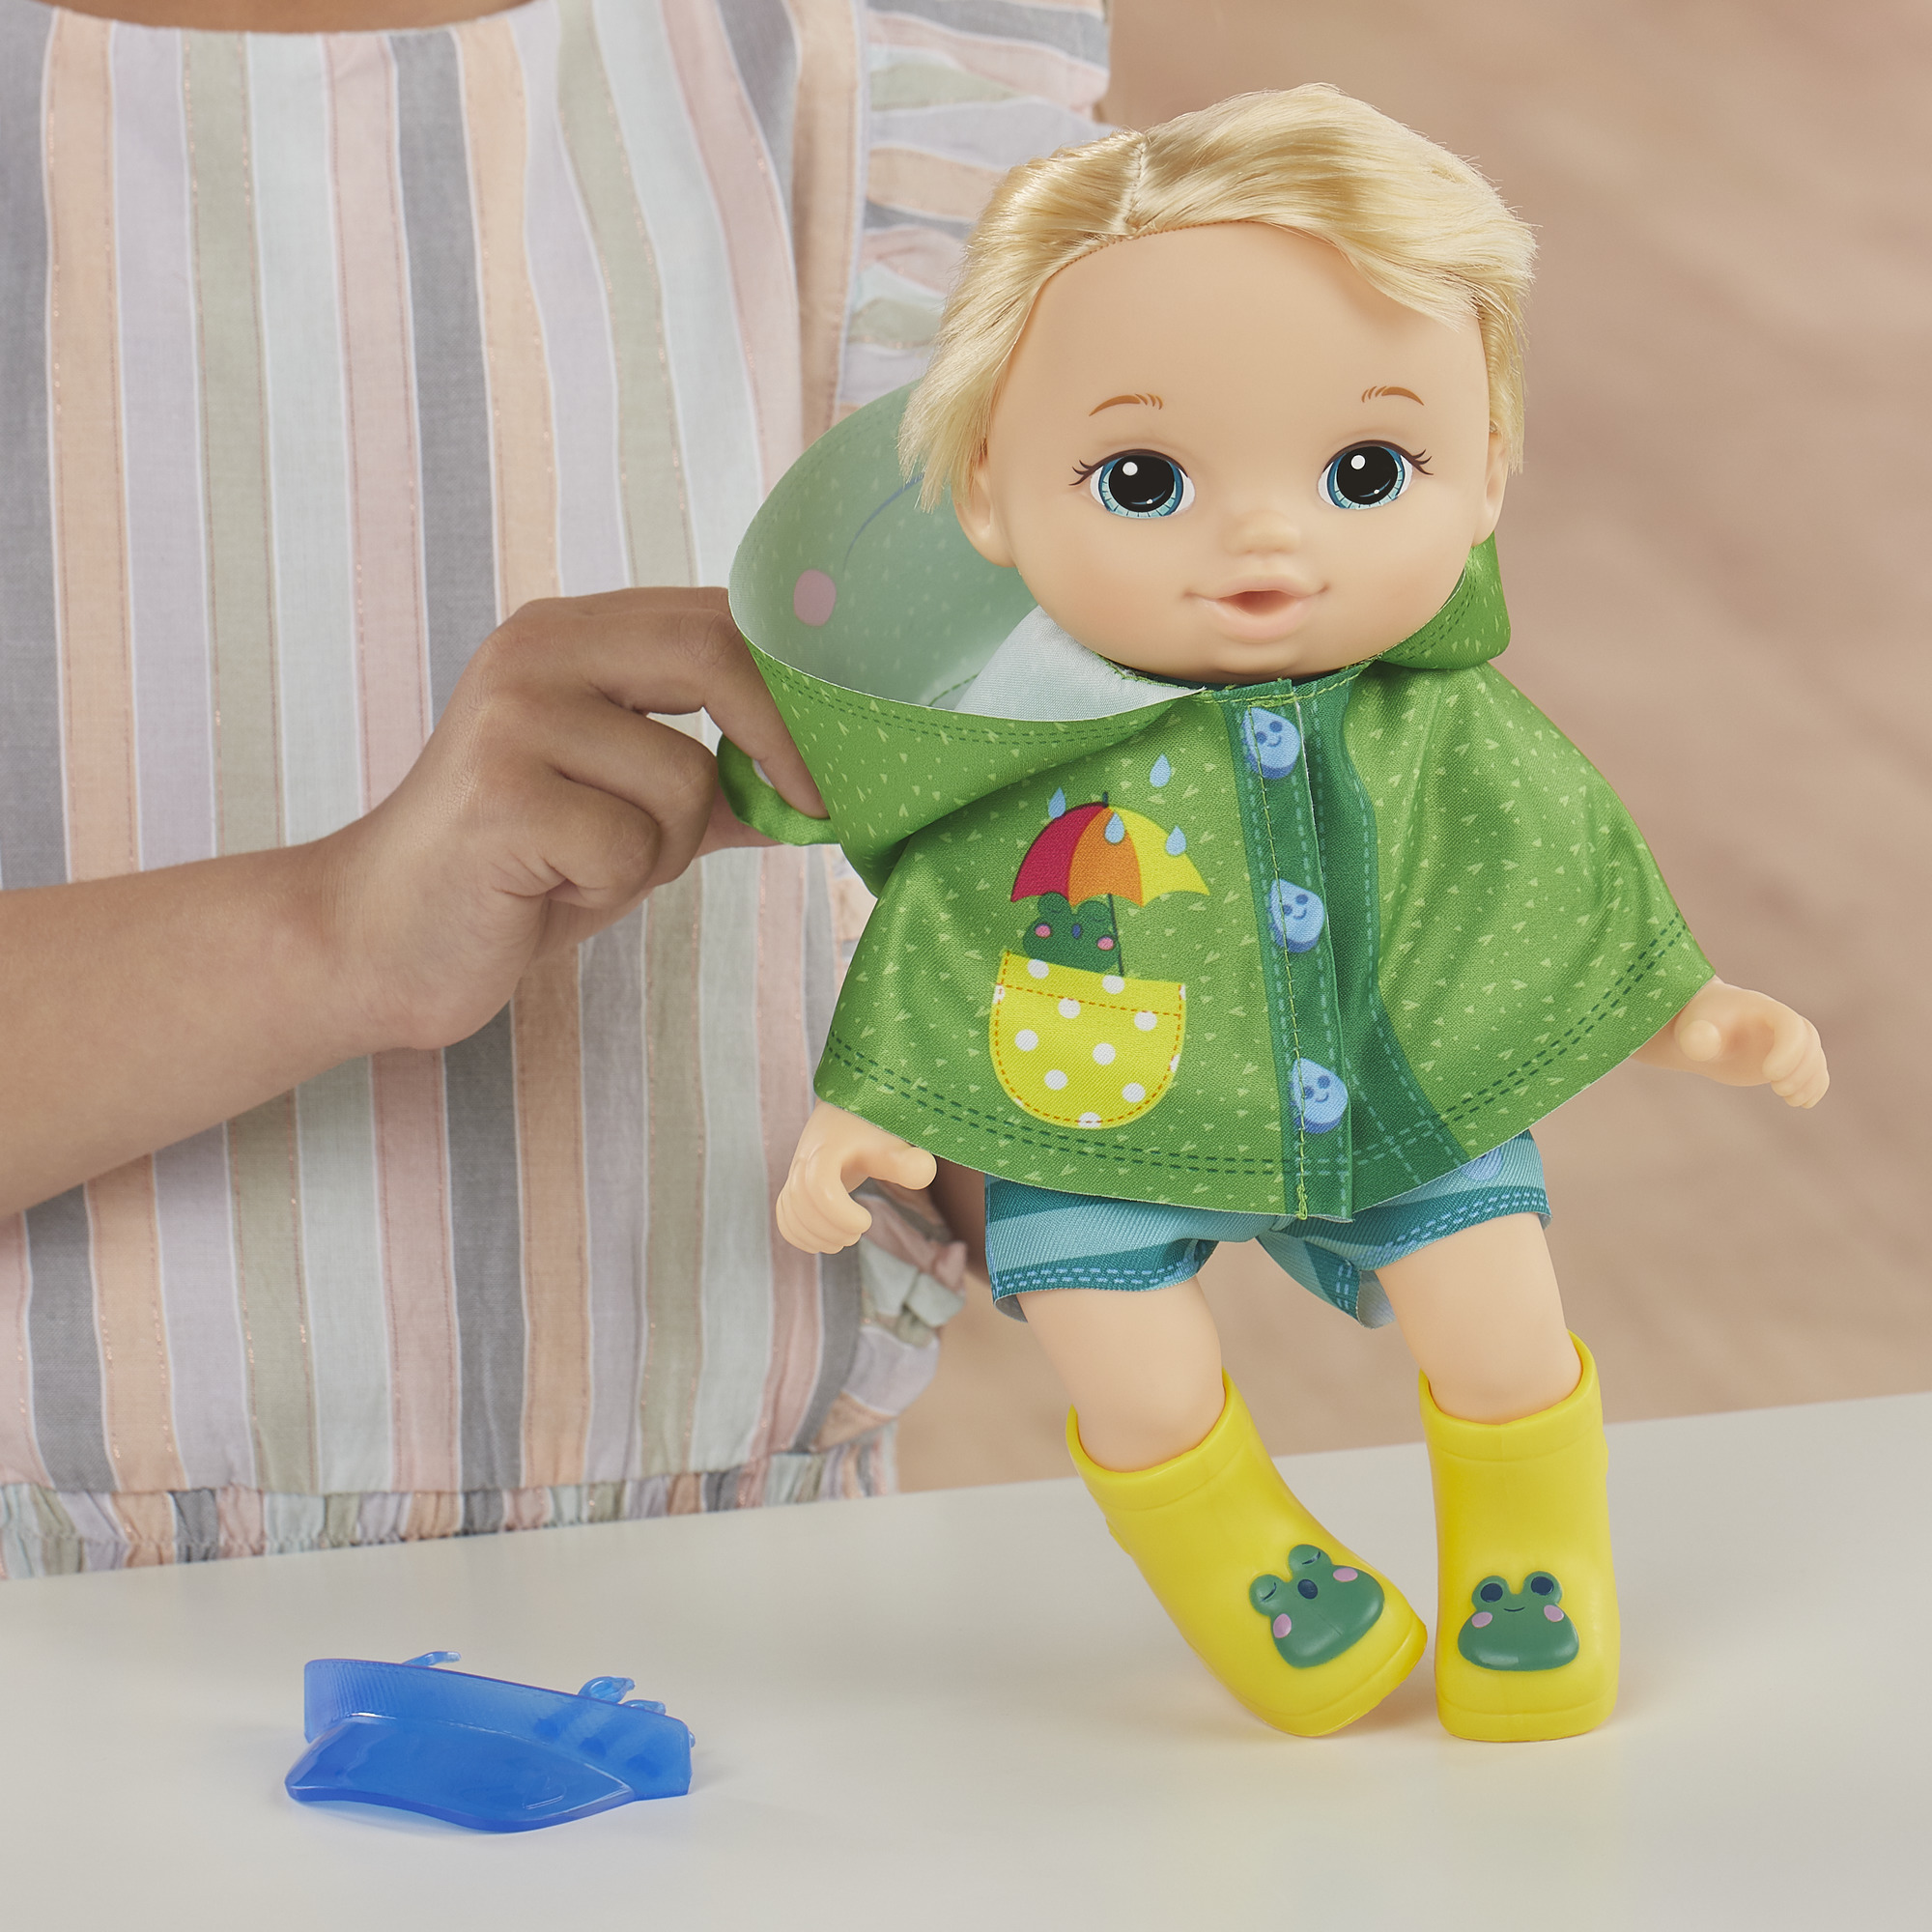 Baby Alive Little Styles, Puddles in the Park Outfit for Littles Doll Clothing - image 4 of 9